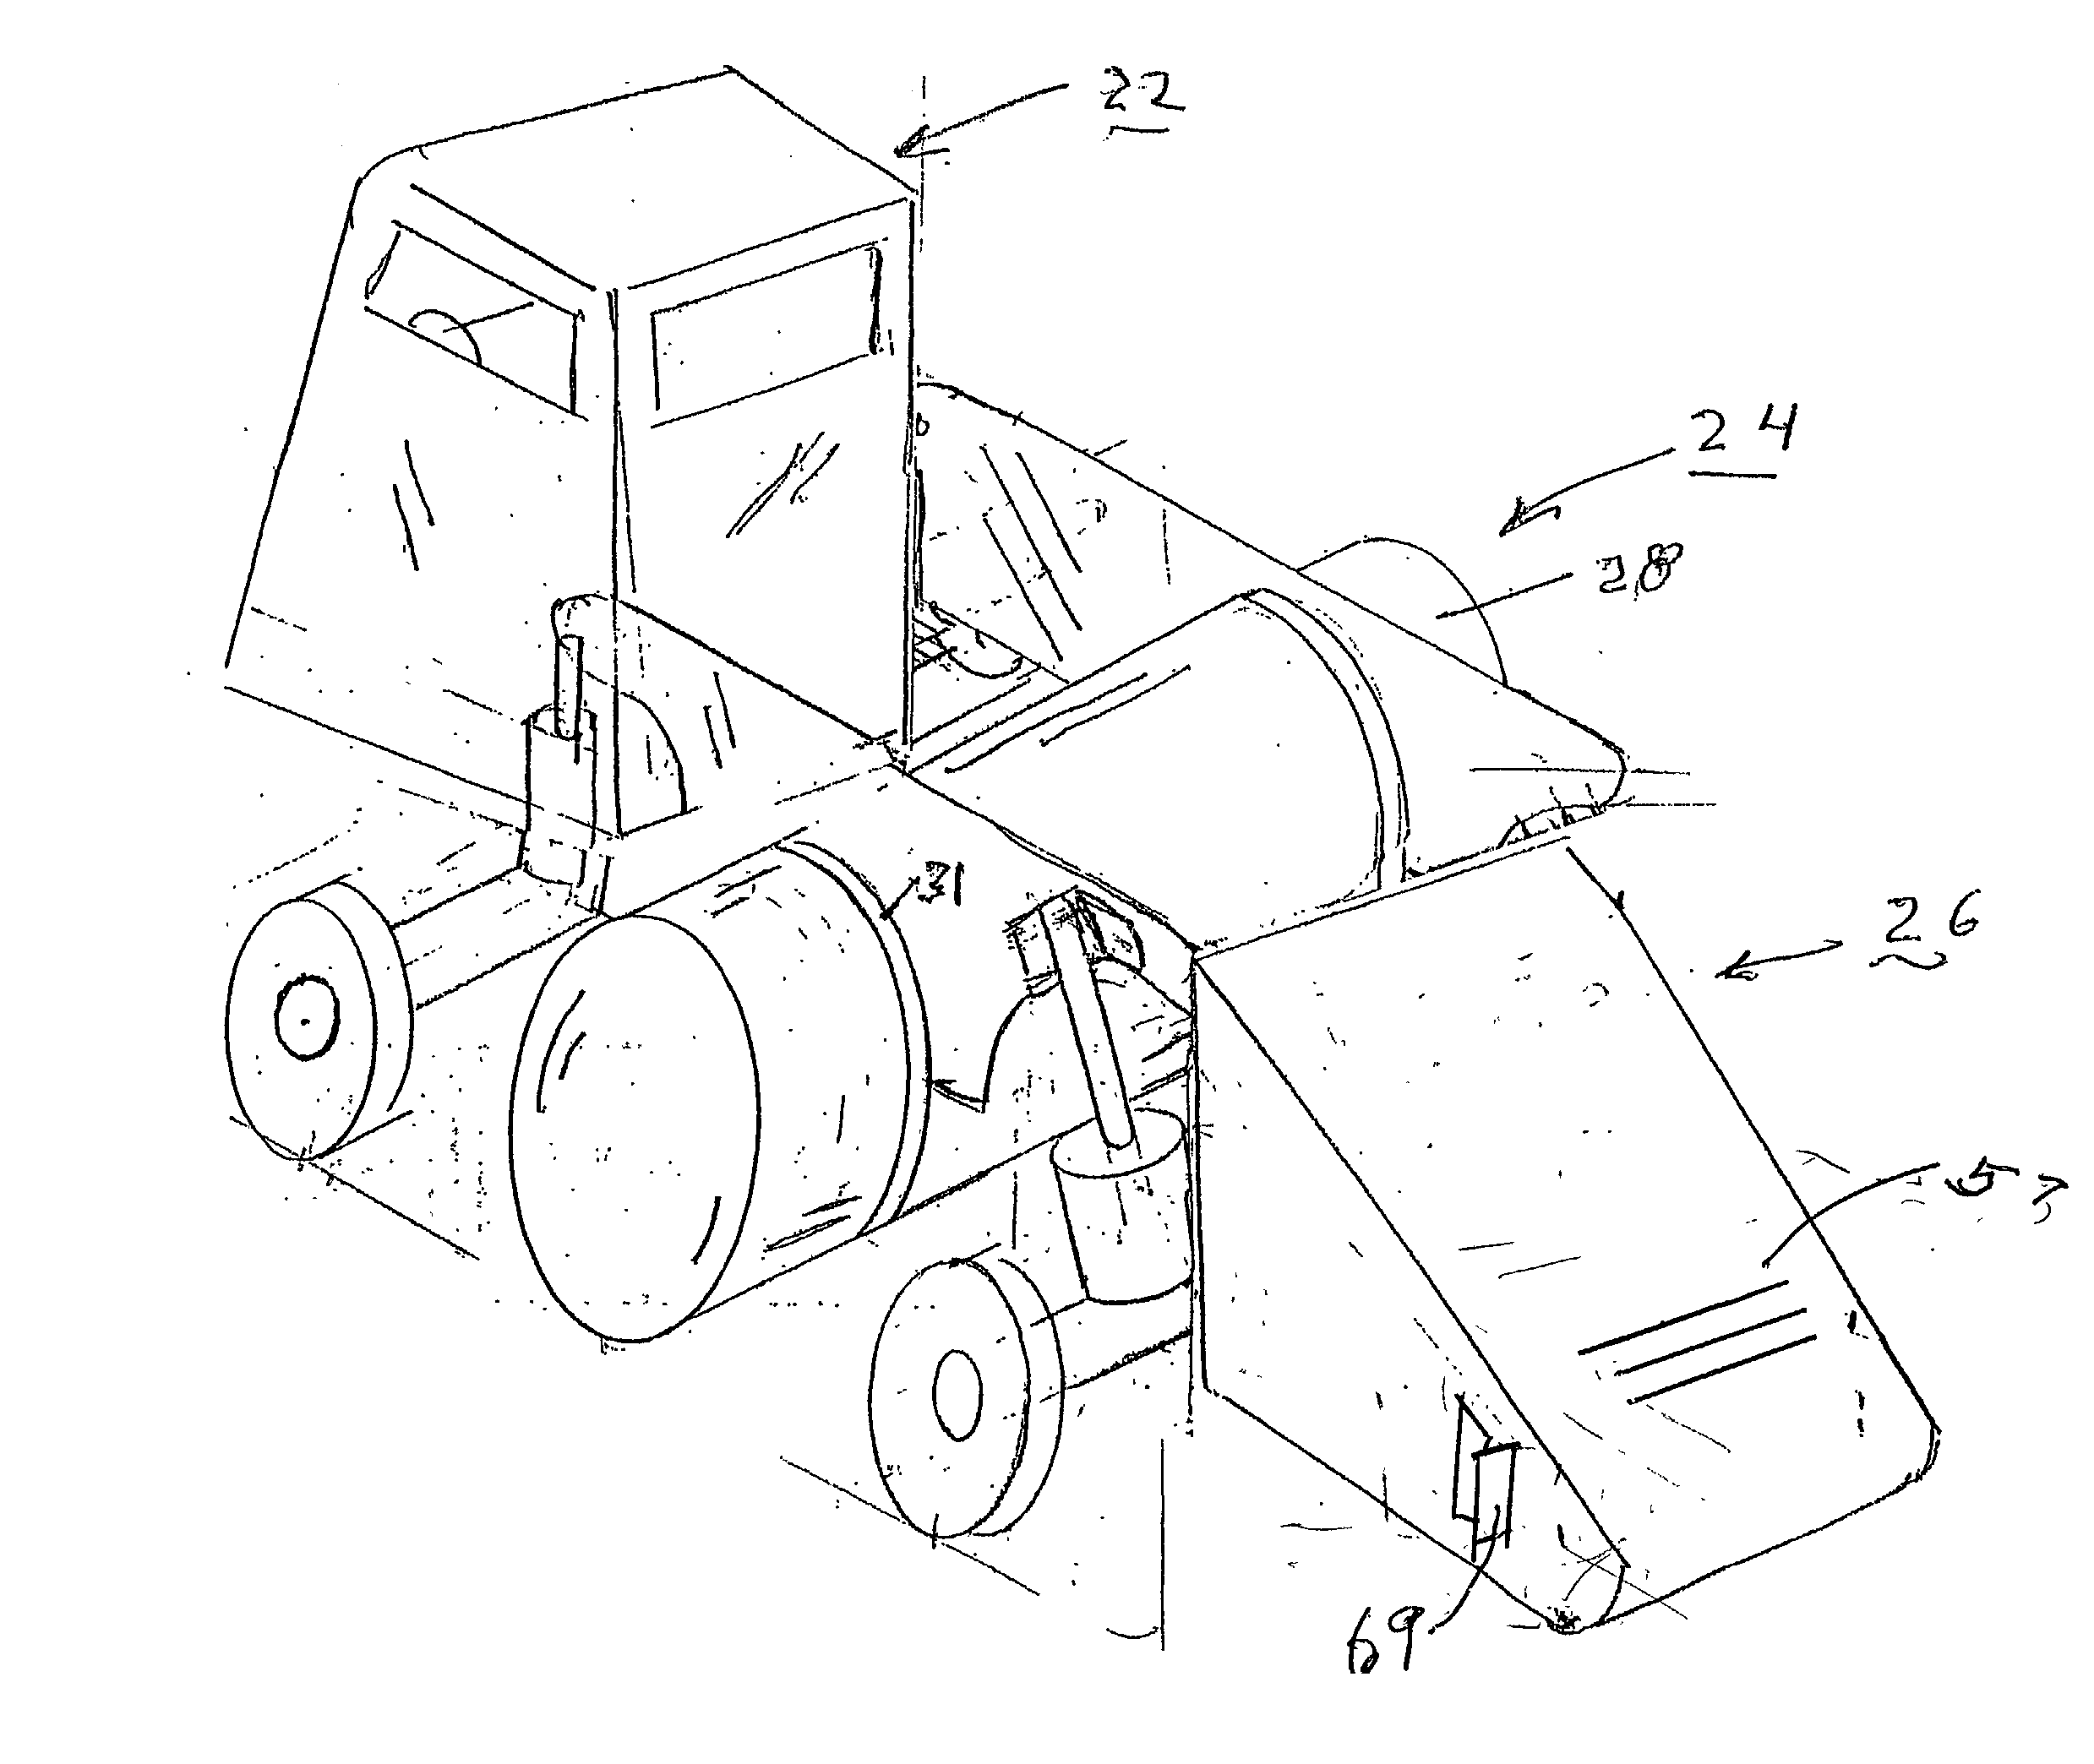 Transport device for hauling a load